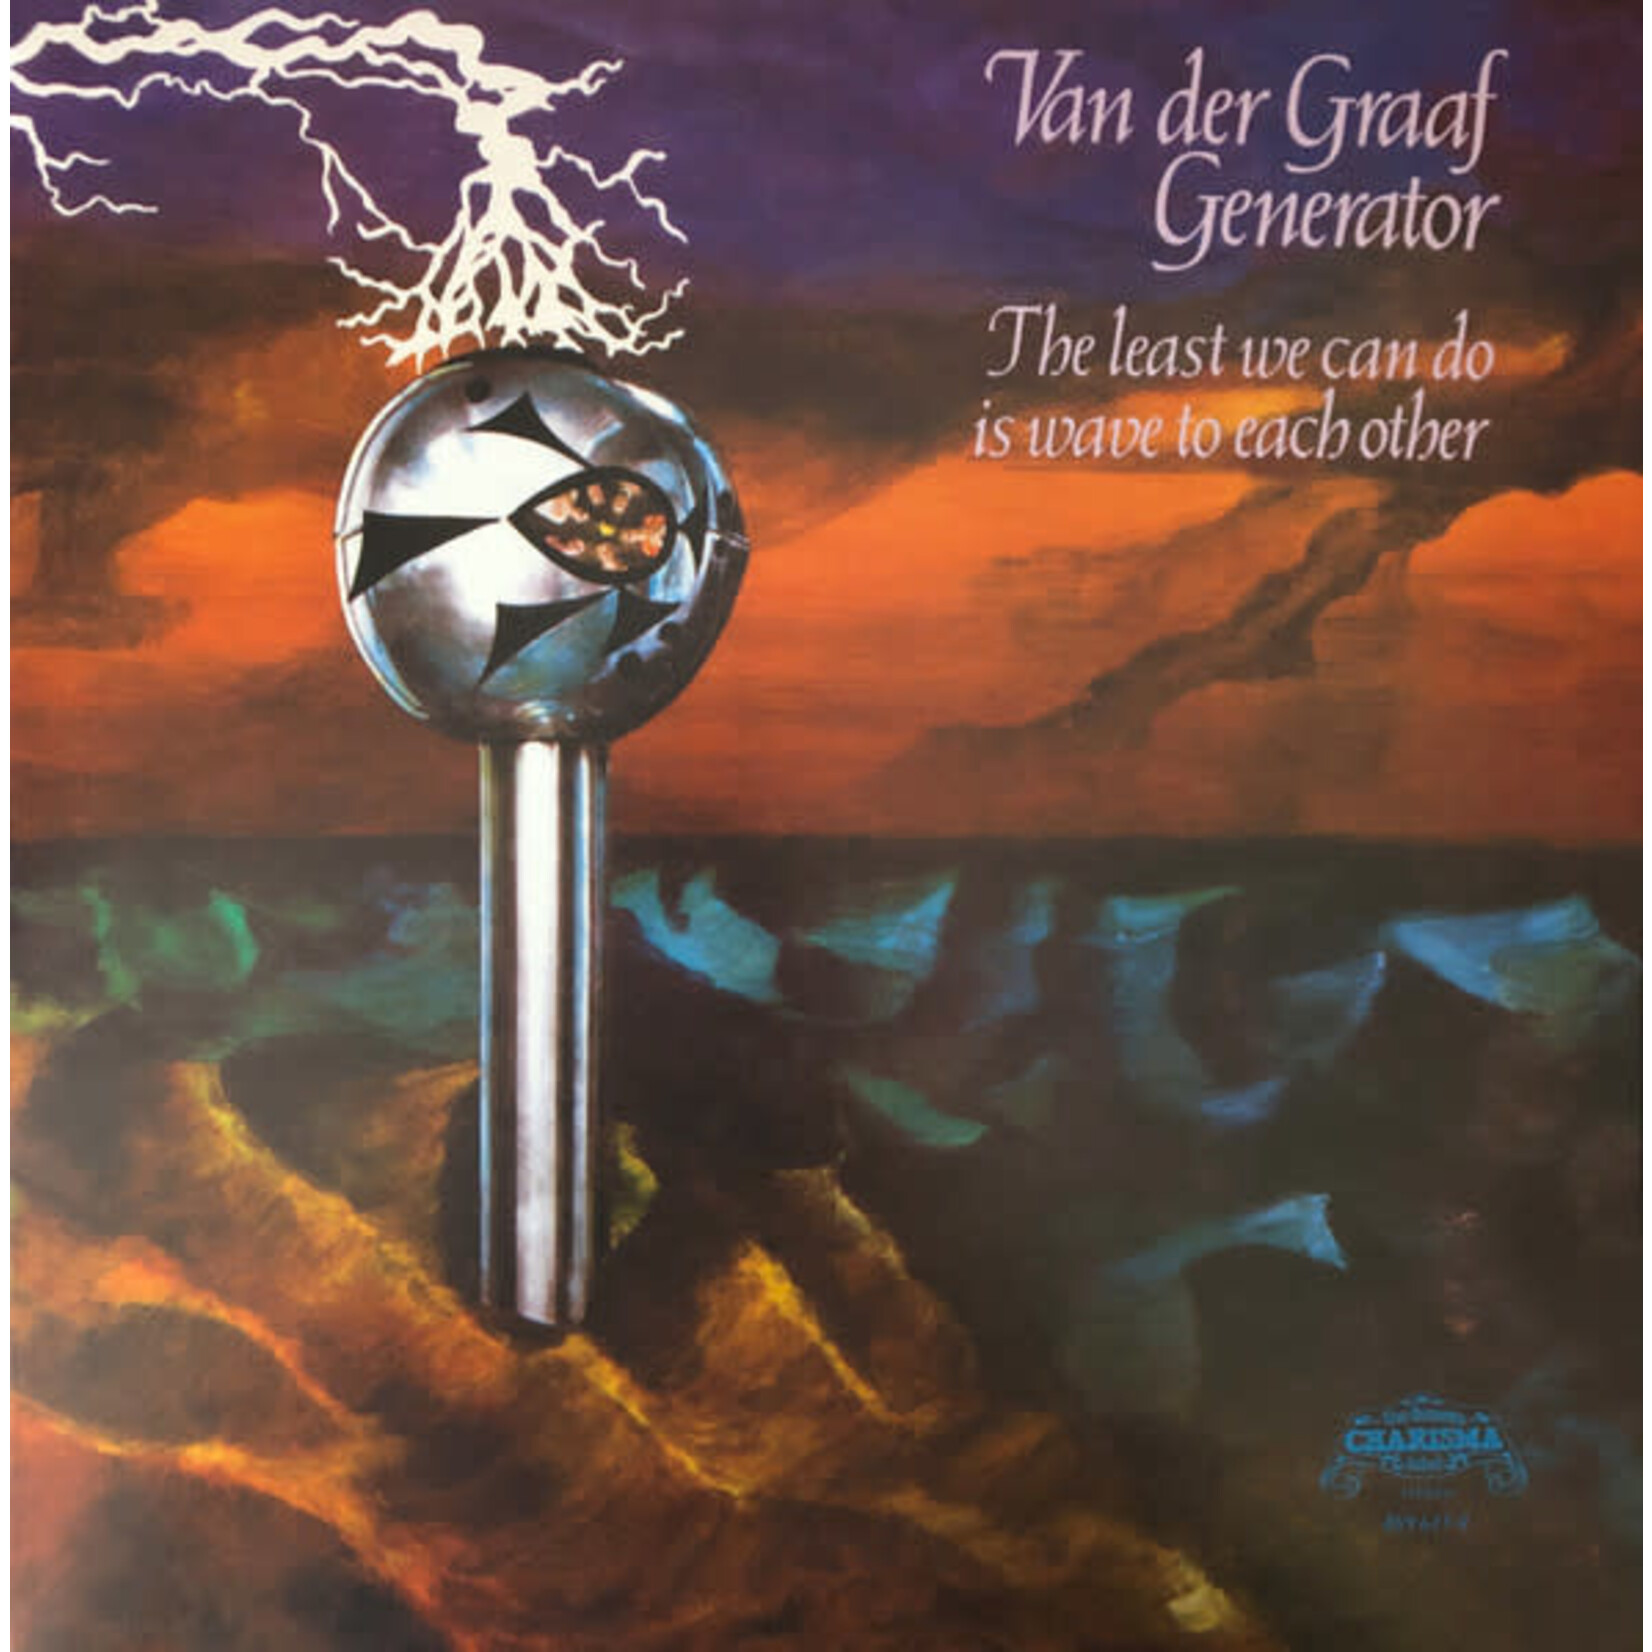 [New] Van Der Graaf Generator - The Least We Can Do.. (Remaster w/ rare poster) ..Is Wave To Each Other